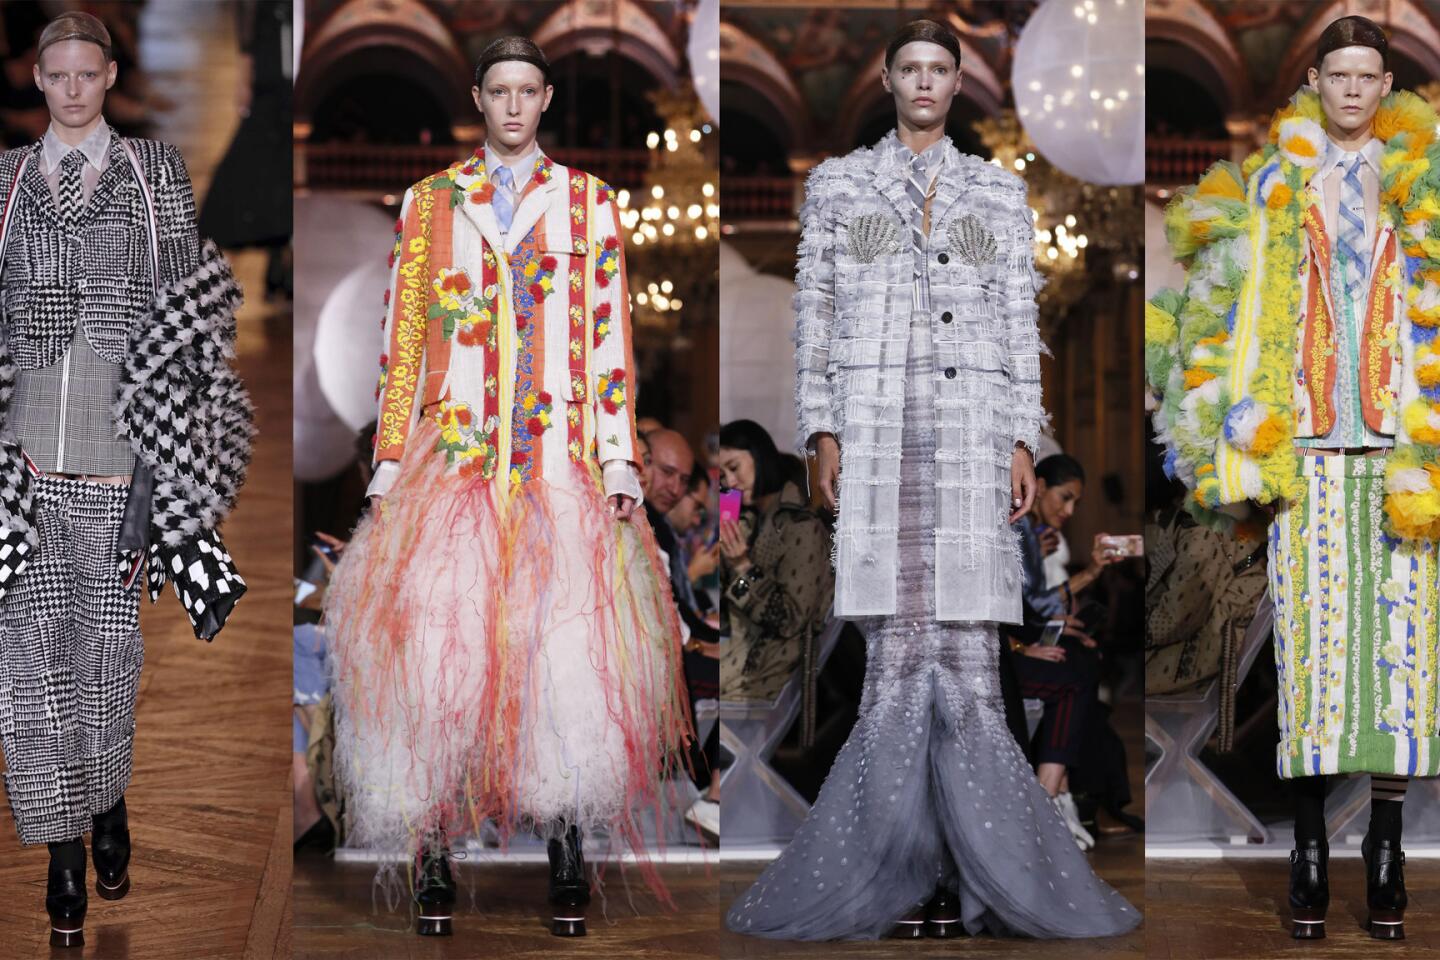 Paris Fashion Week: Spring trends include black and white and a whole ...